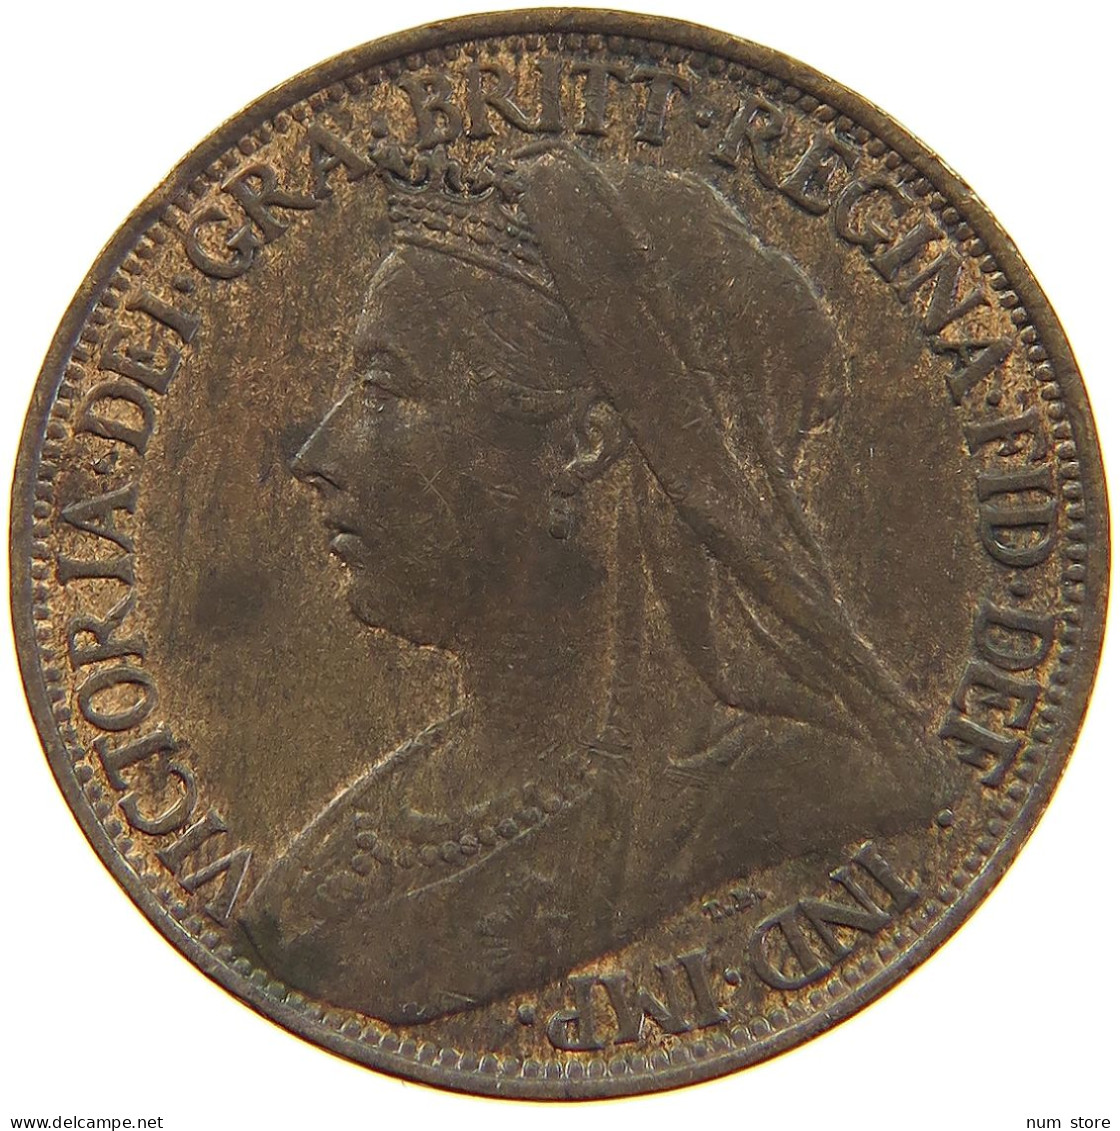 GREAT BRITAIN FARTHING 1901 Victoria 1837-1901 #a011 1005 - B. 1 Farthing